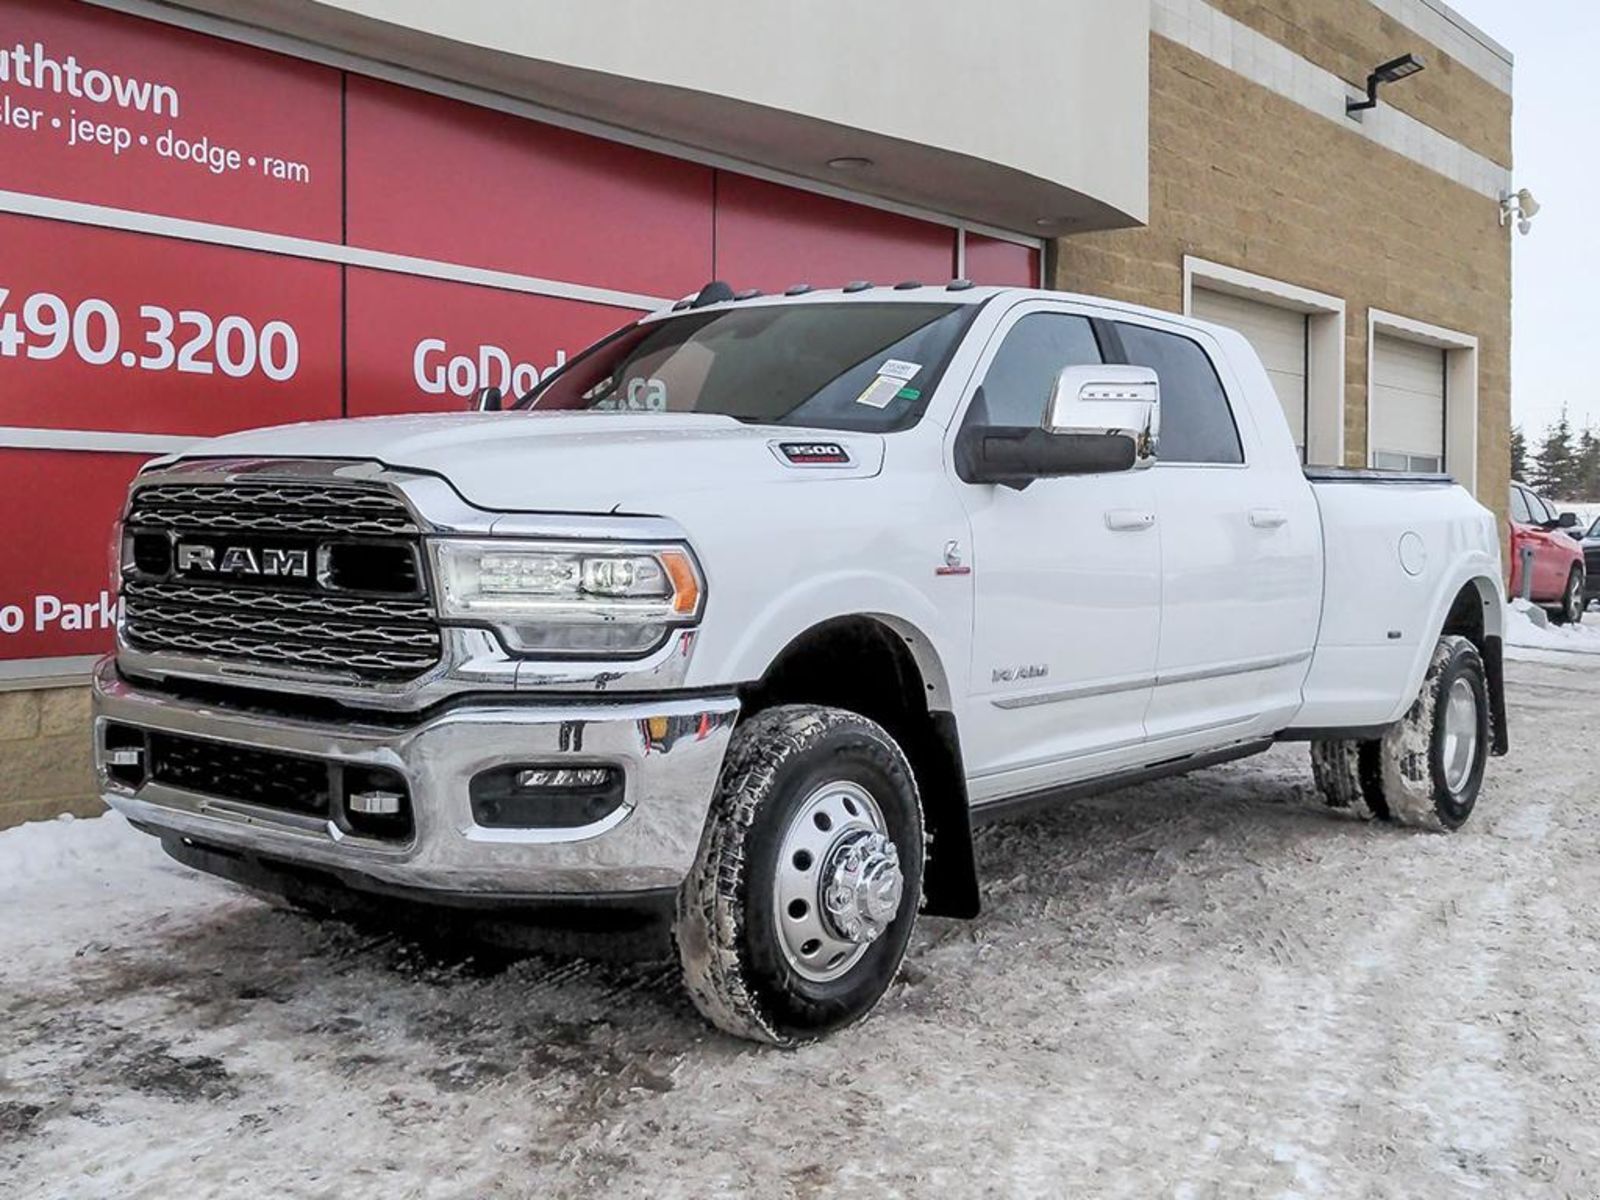 2024 Ram 3500 LIMITED MEGA CAB DUALLY IN BRIGHT WHITE EQUIPPED W